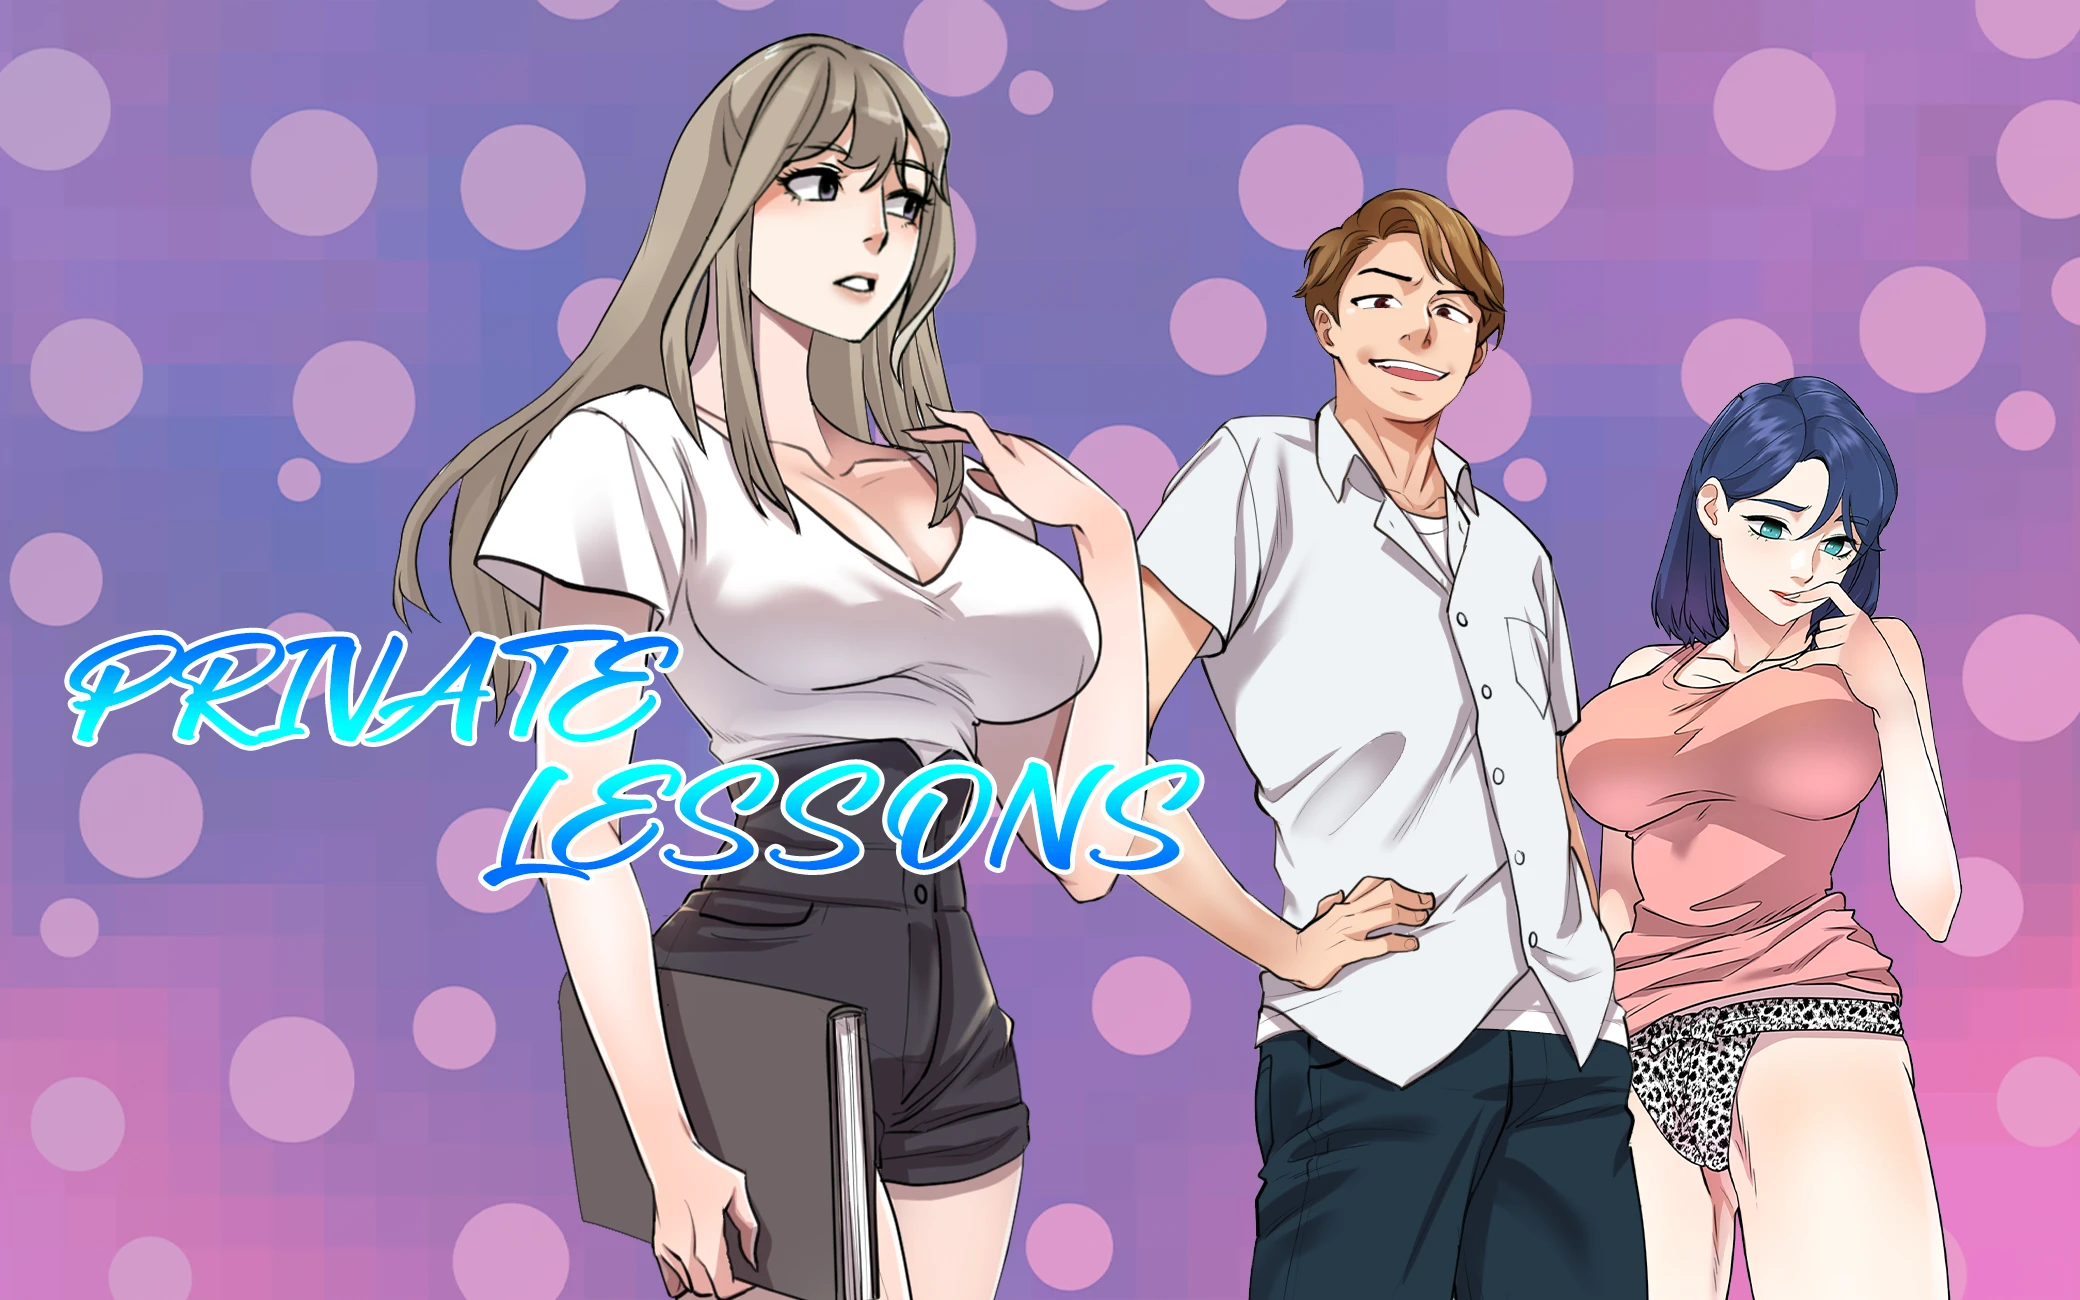 Private Lessons – A Webtoon of Learning and Intrigue